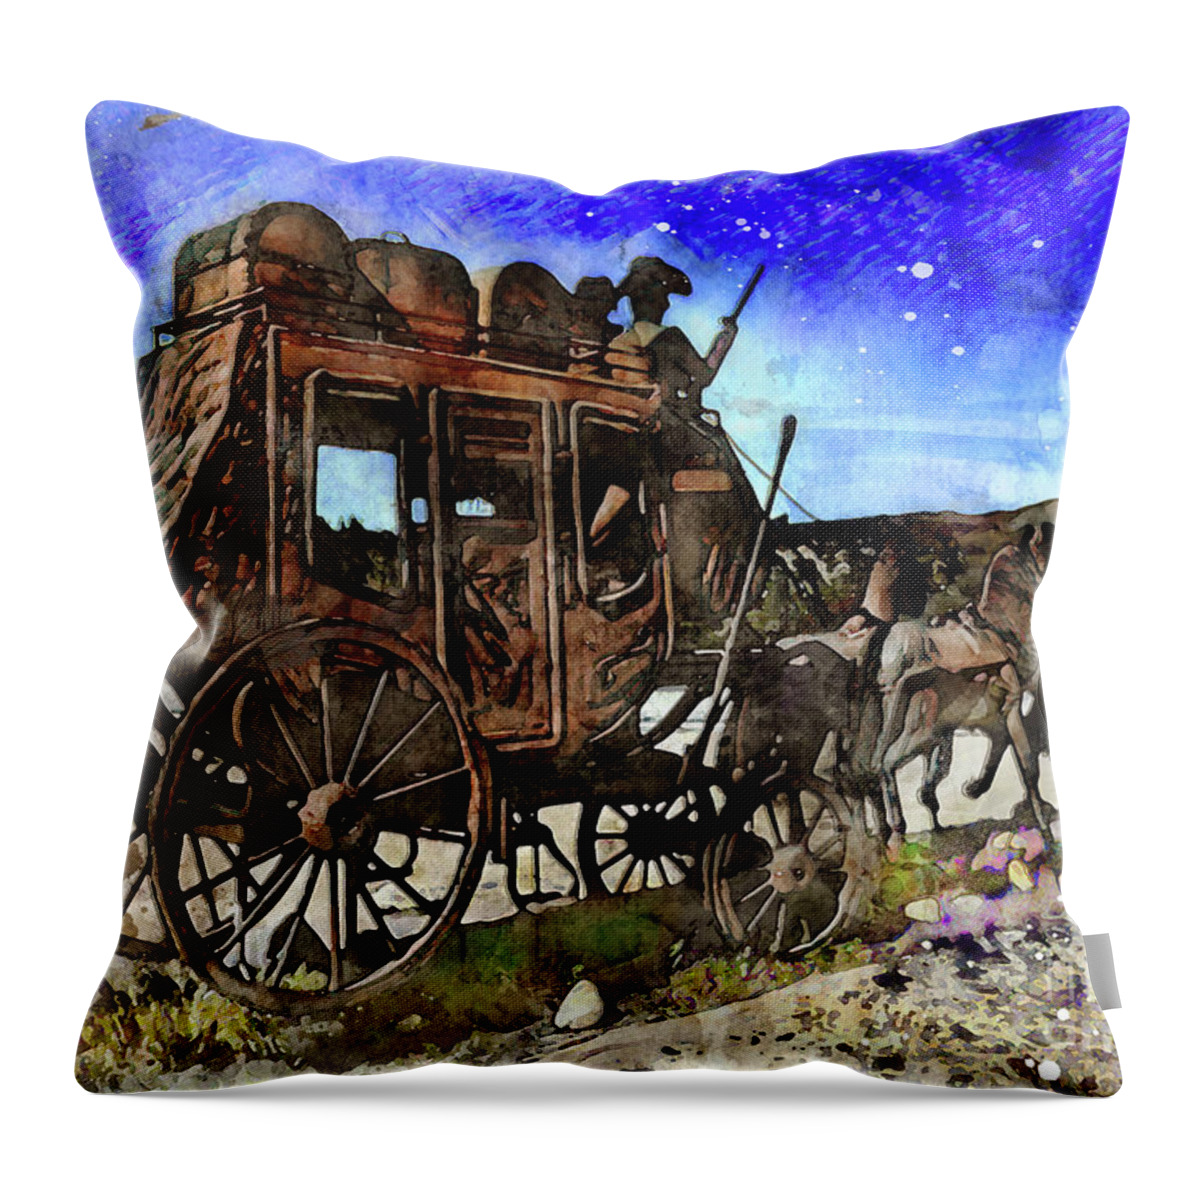 Stagecoach Throw Pillow featuring the digital art Stagecoach by Mark Jackson